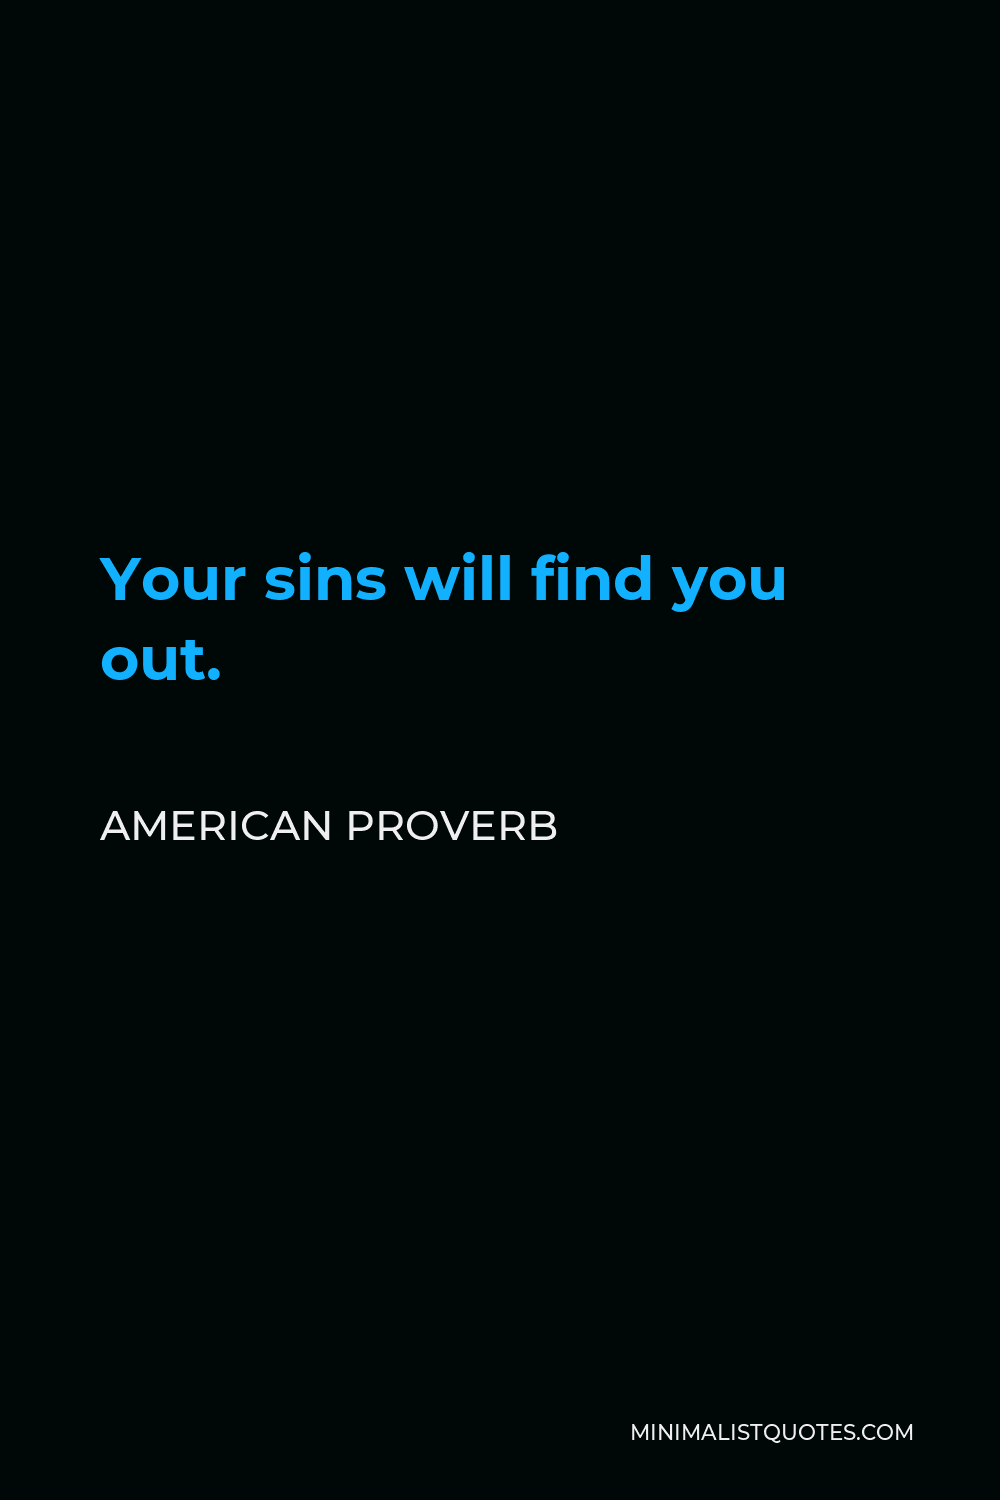 American Proverb Quote - Your sins will find you out.